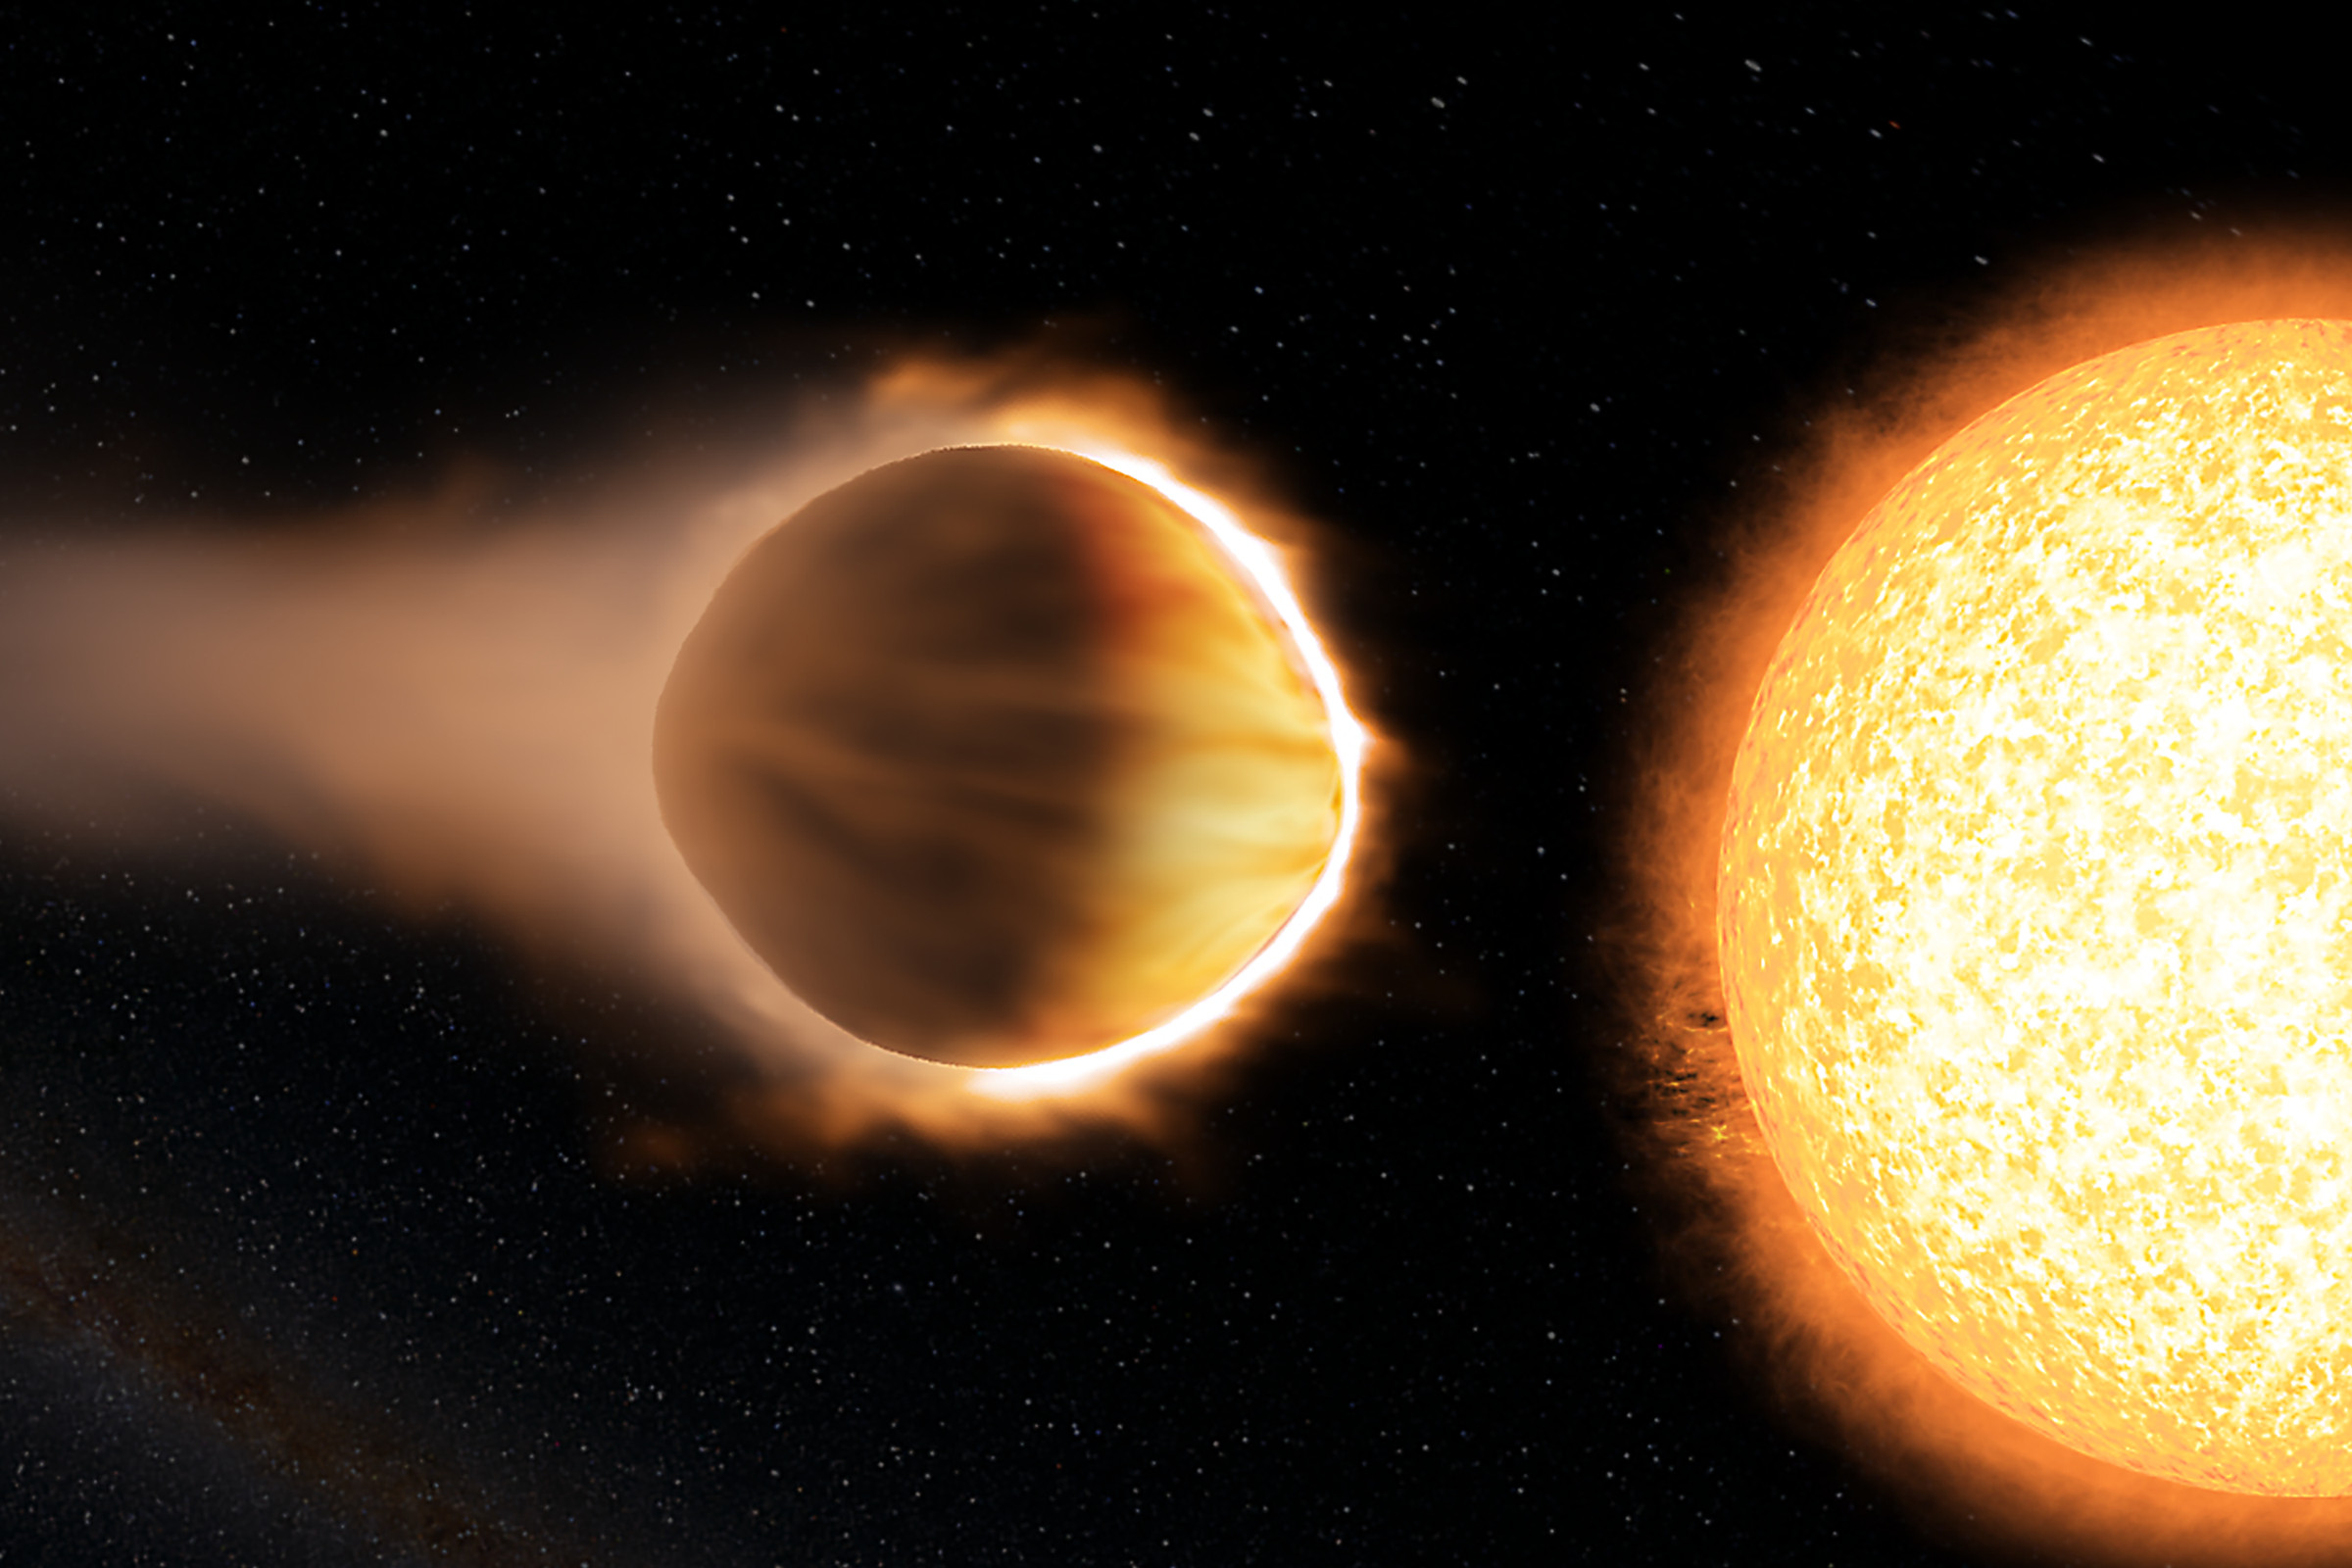 An illustration of WASP-121b, a super hot gas giant found to have a stratosphere